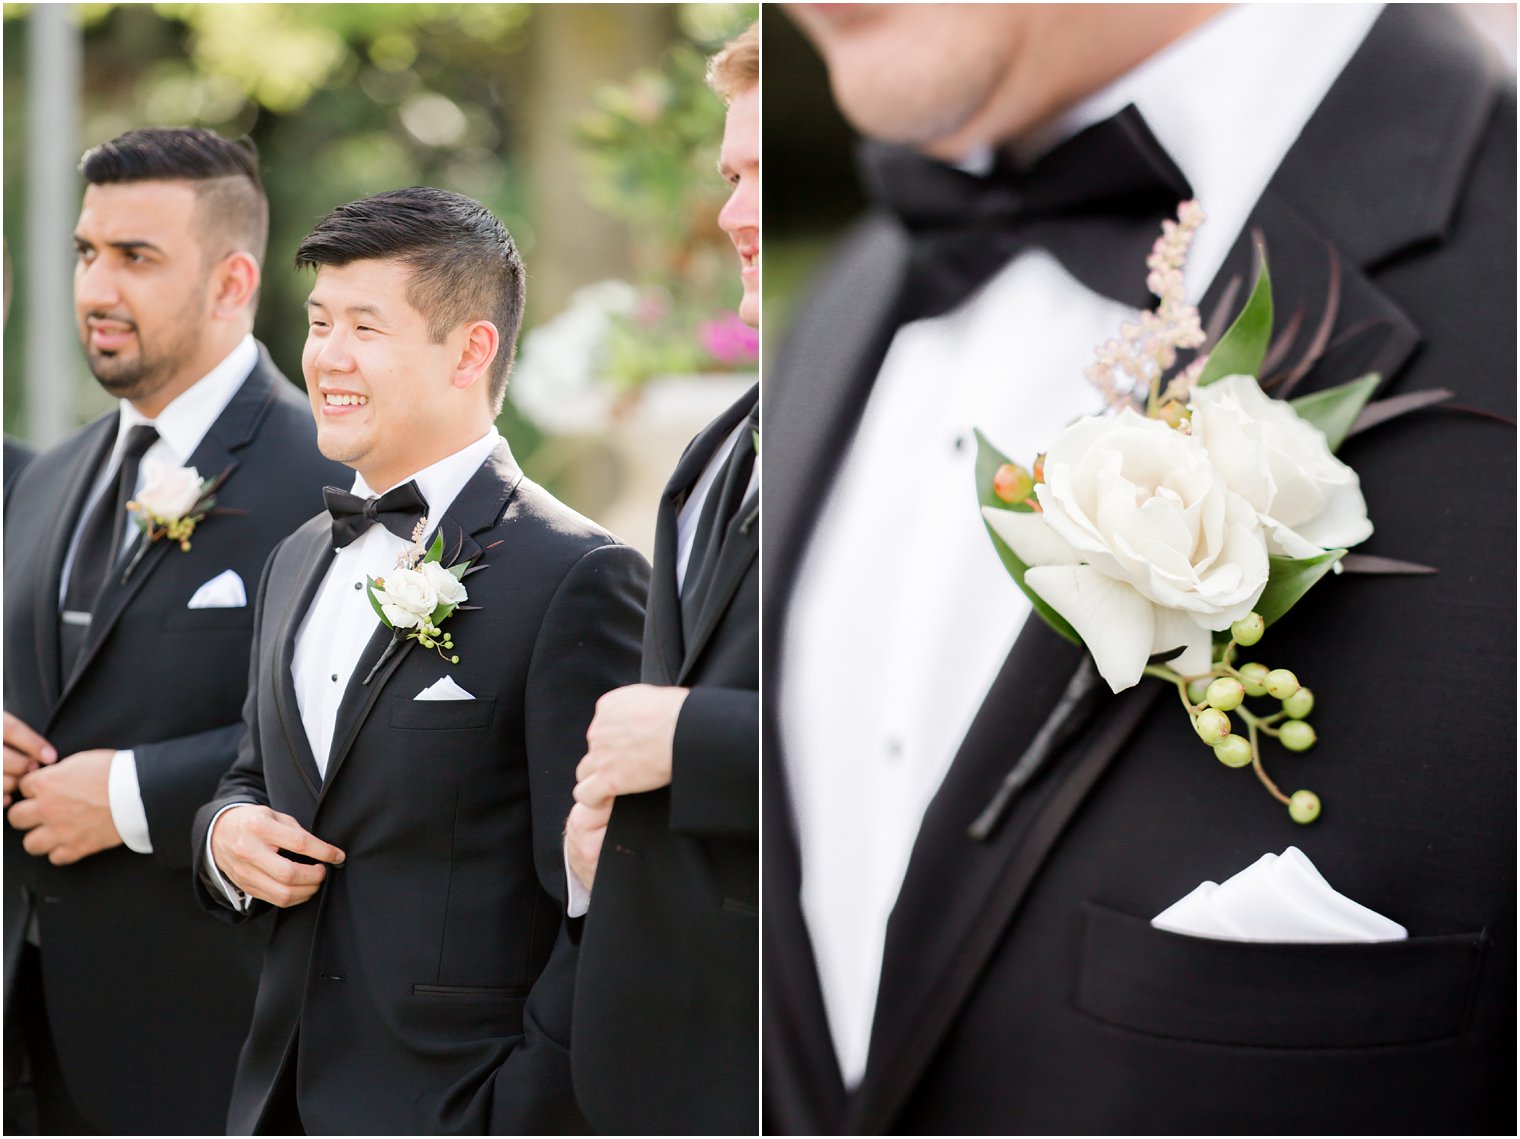 groom's boutonniere from Petal Pushers Magnolia